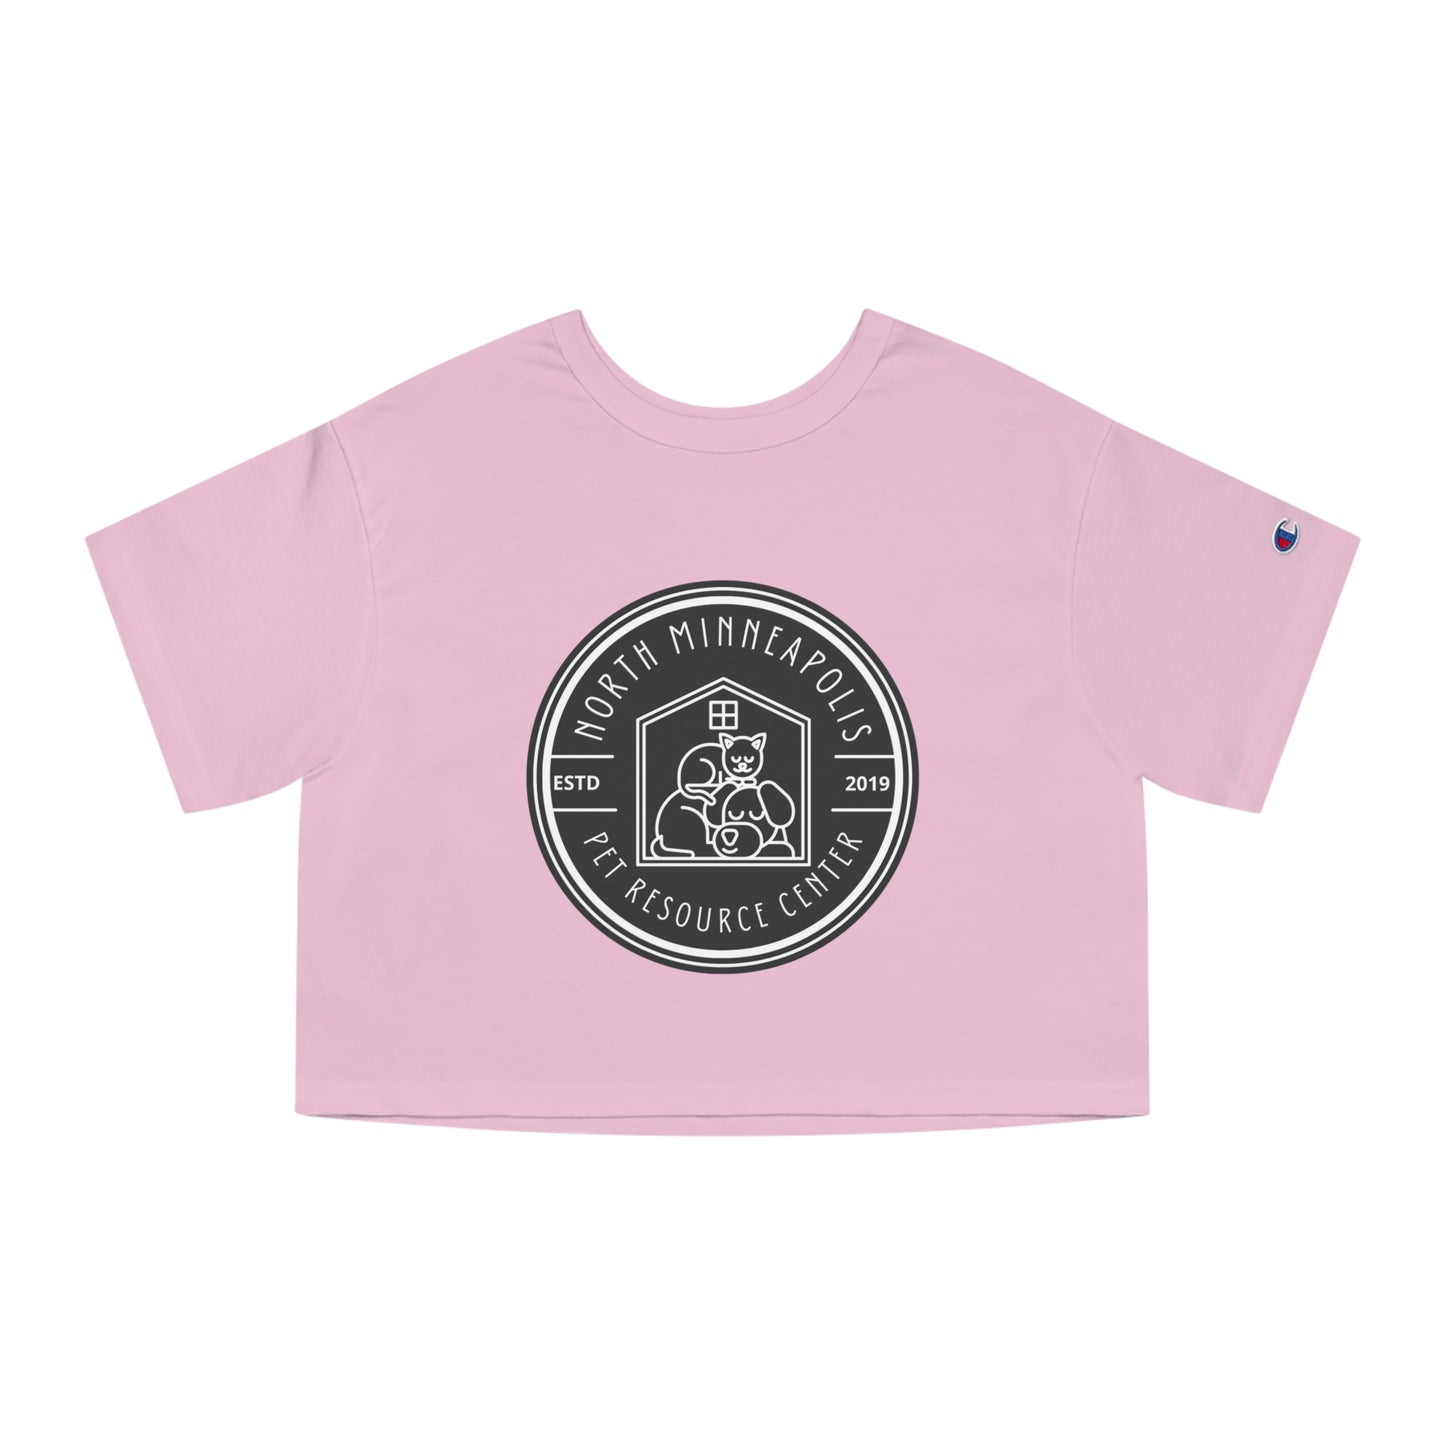 NMPRC Pets Champion Women's Heritage Cropped T-Shirt